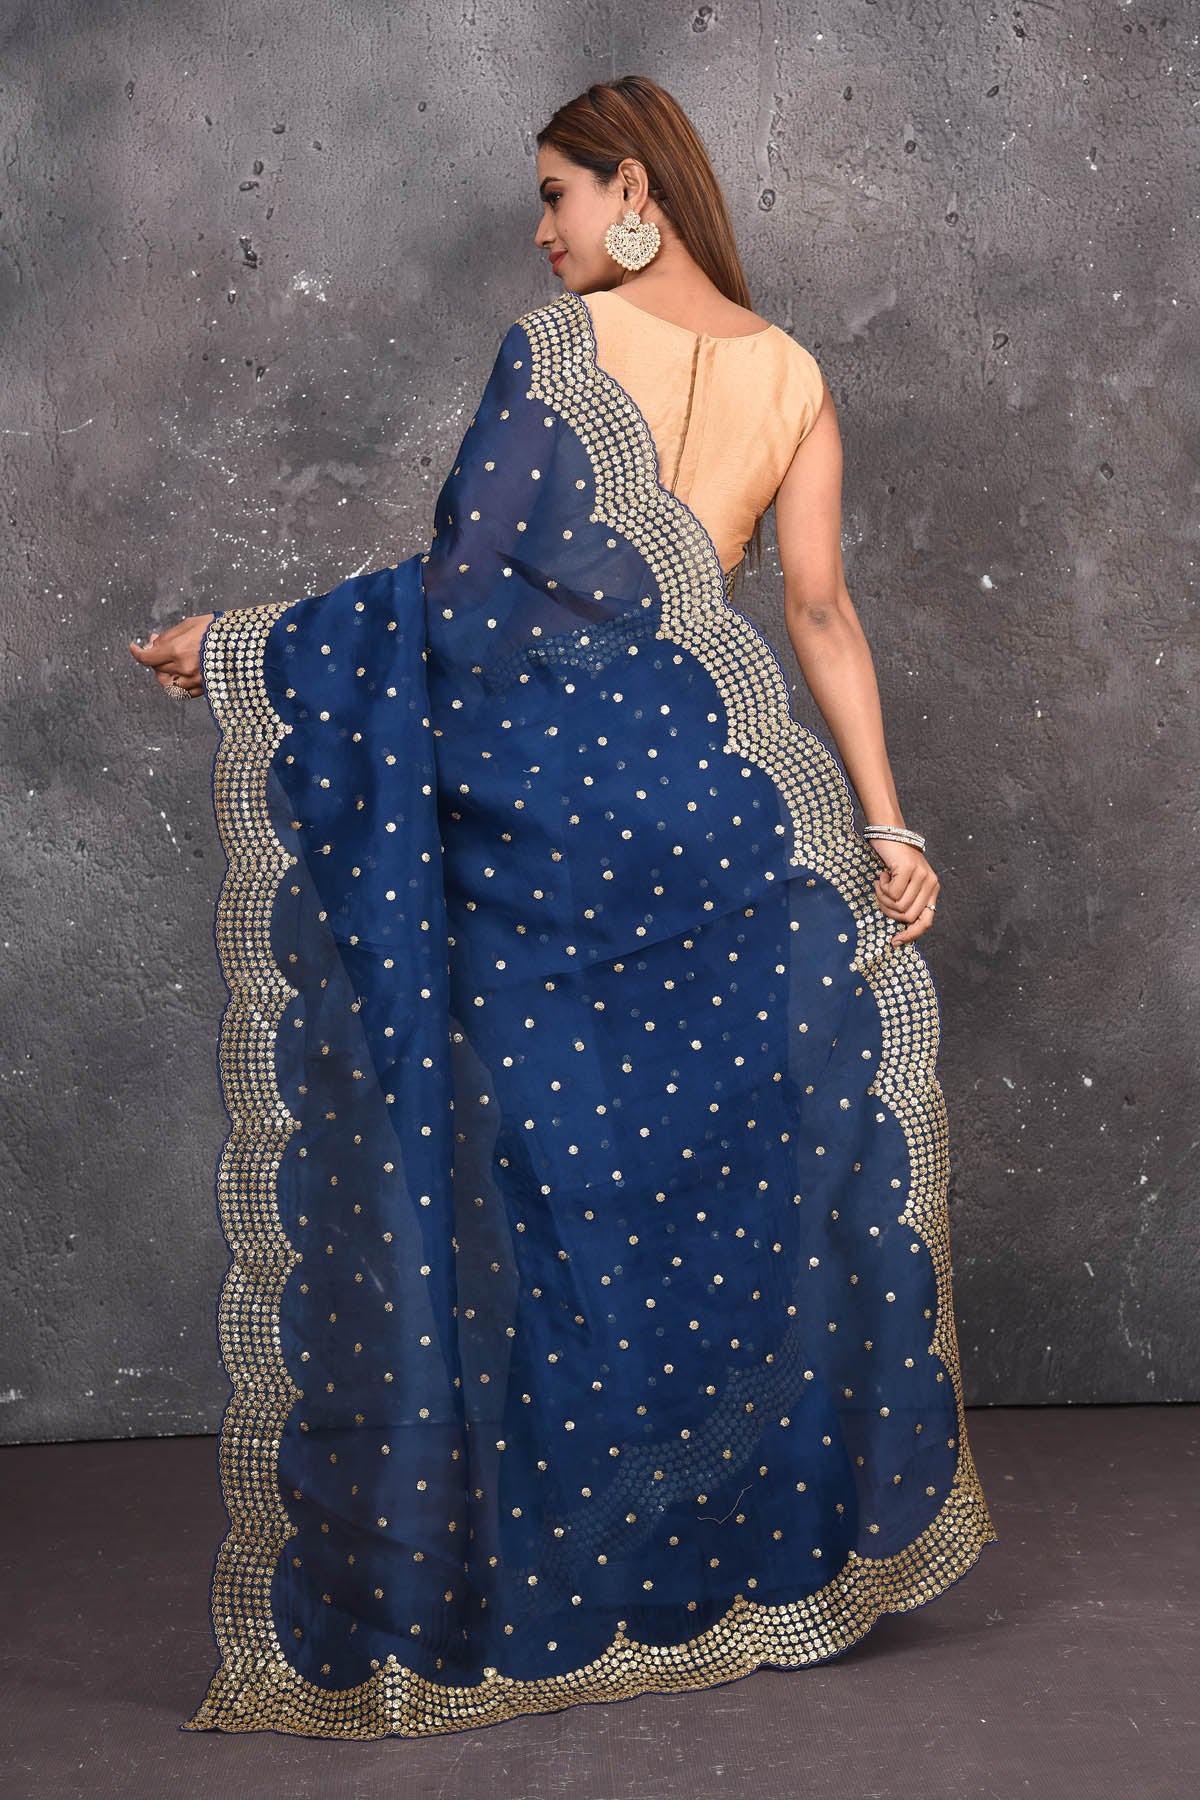 Buy exquisite navy blue organza saree with golden embroidered online in USA. Pure organza sarees by Pure Elegance in blue color. It has a beautiful gold embroidered border. This organza brings the charm and simplicity of this saree with border and pallu with the delegate embroidery work on border. Shop this designer silk sari from Pure Elegance Indian fashion store in USA.-Back view with open pallu.